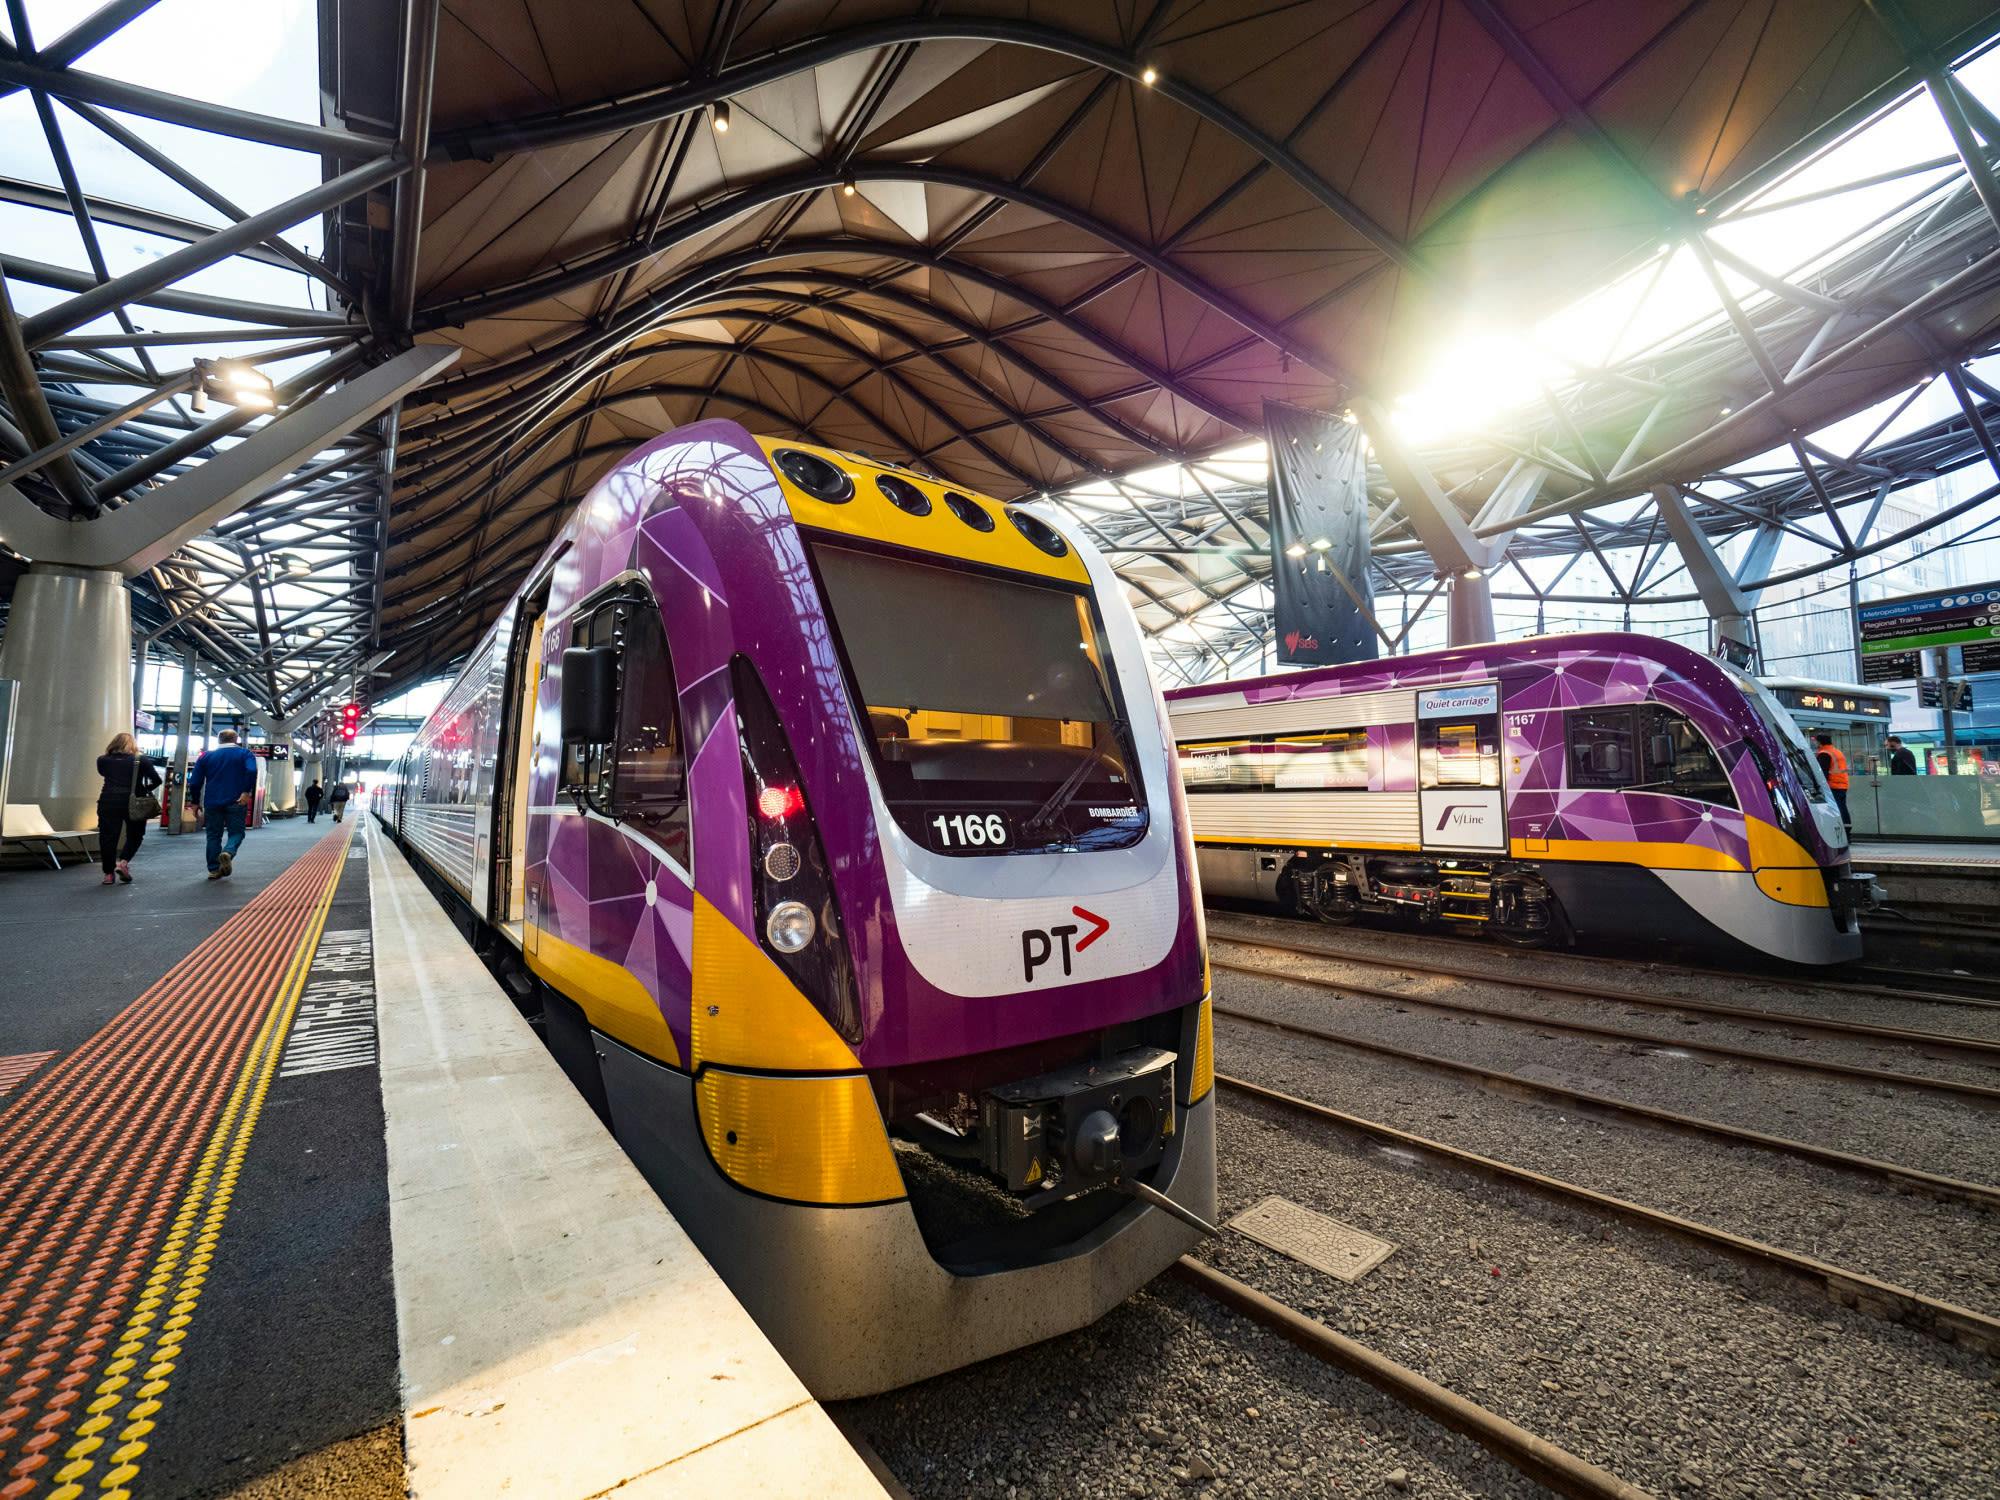 Two purple and yellow passenger trains parked in a station